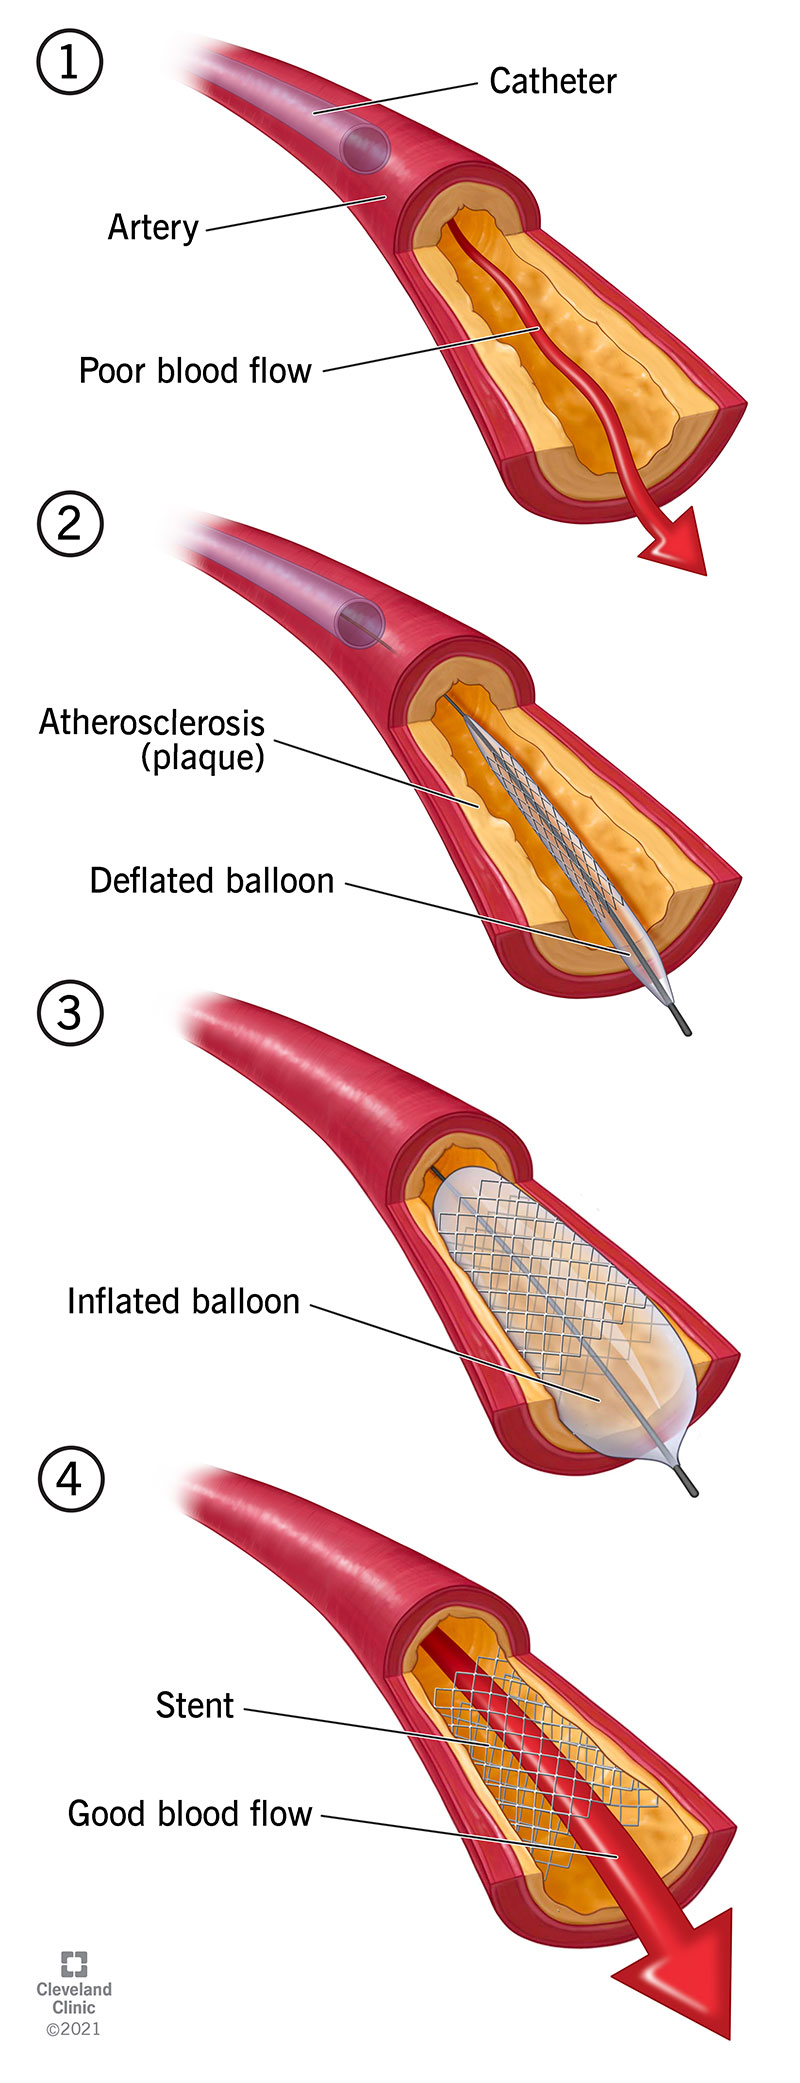 A balloon forces plaque against your artery wall.